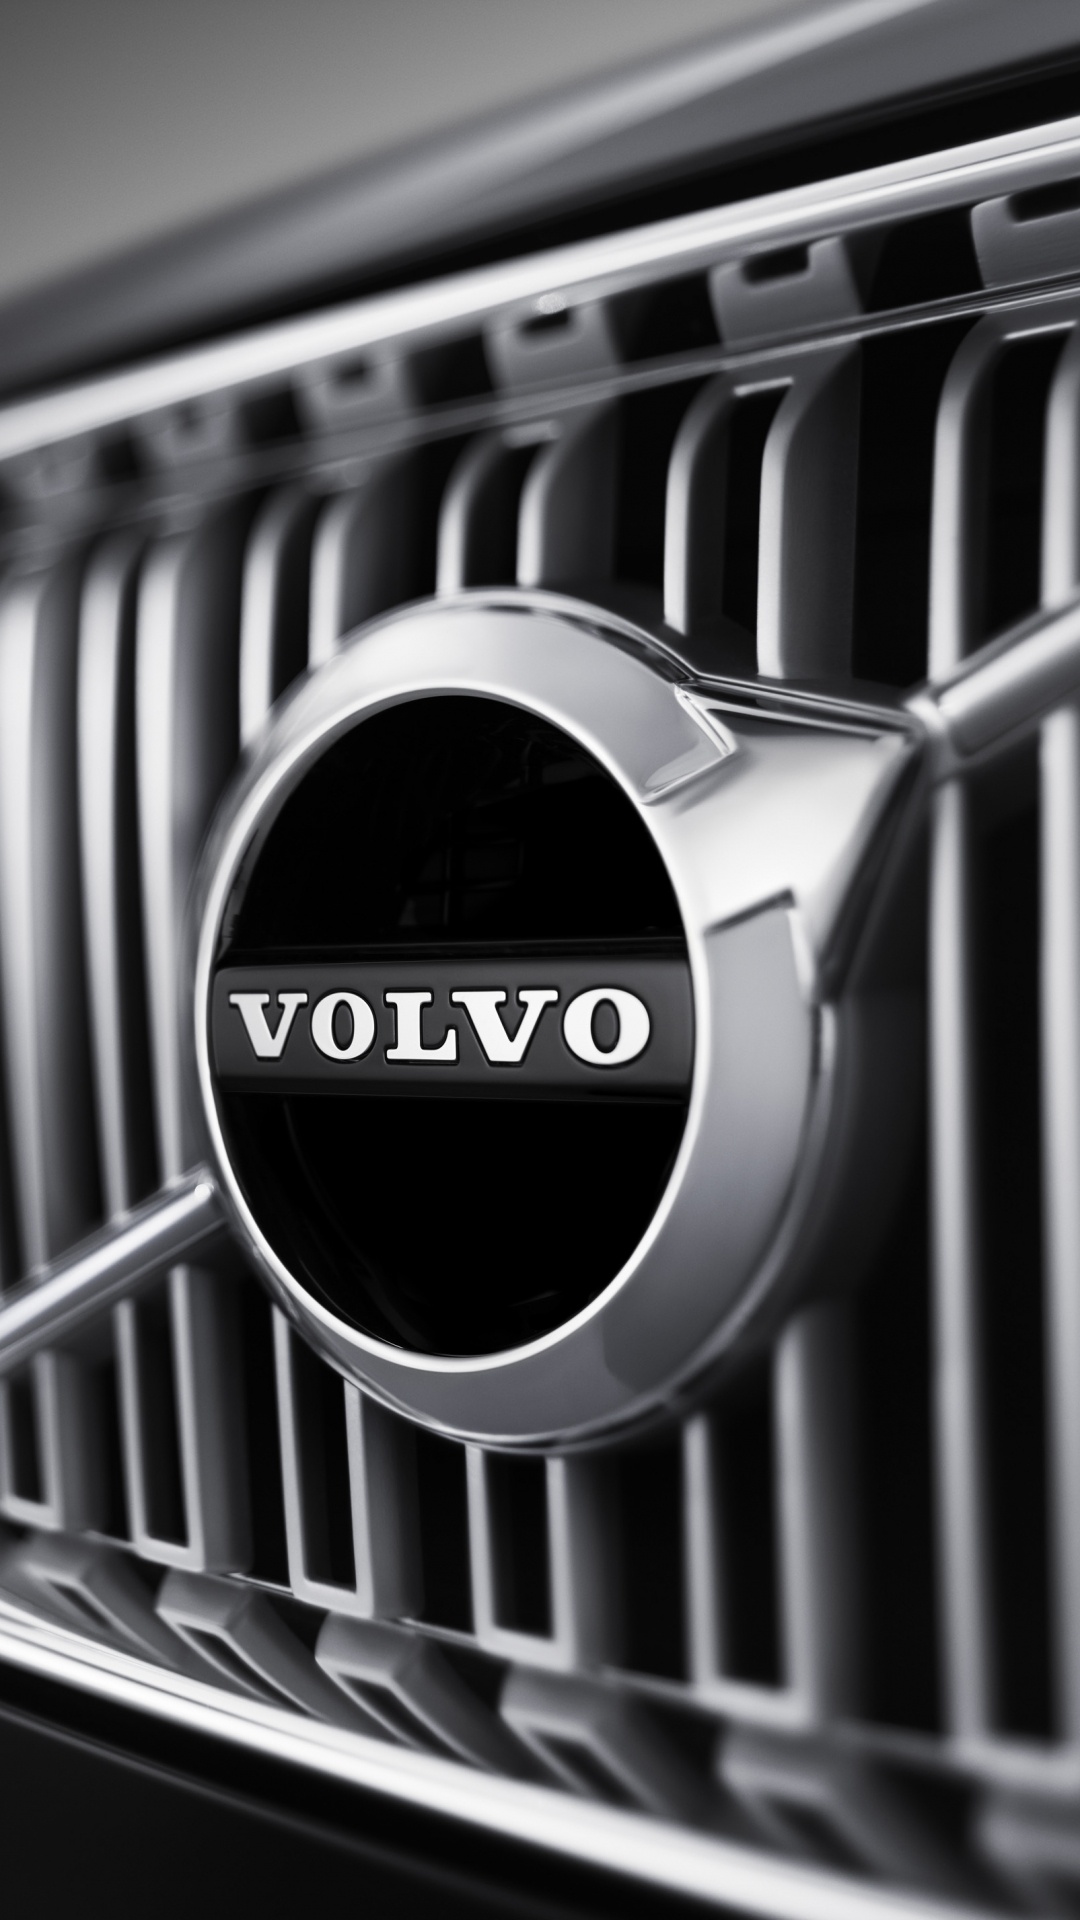 ab Volvo, Volvo Cars, Car, Grille, Black and White. Wallpaper in 1080x1920 Resolution